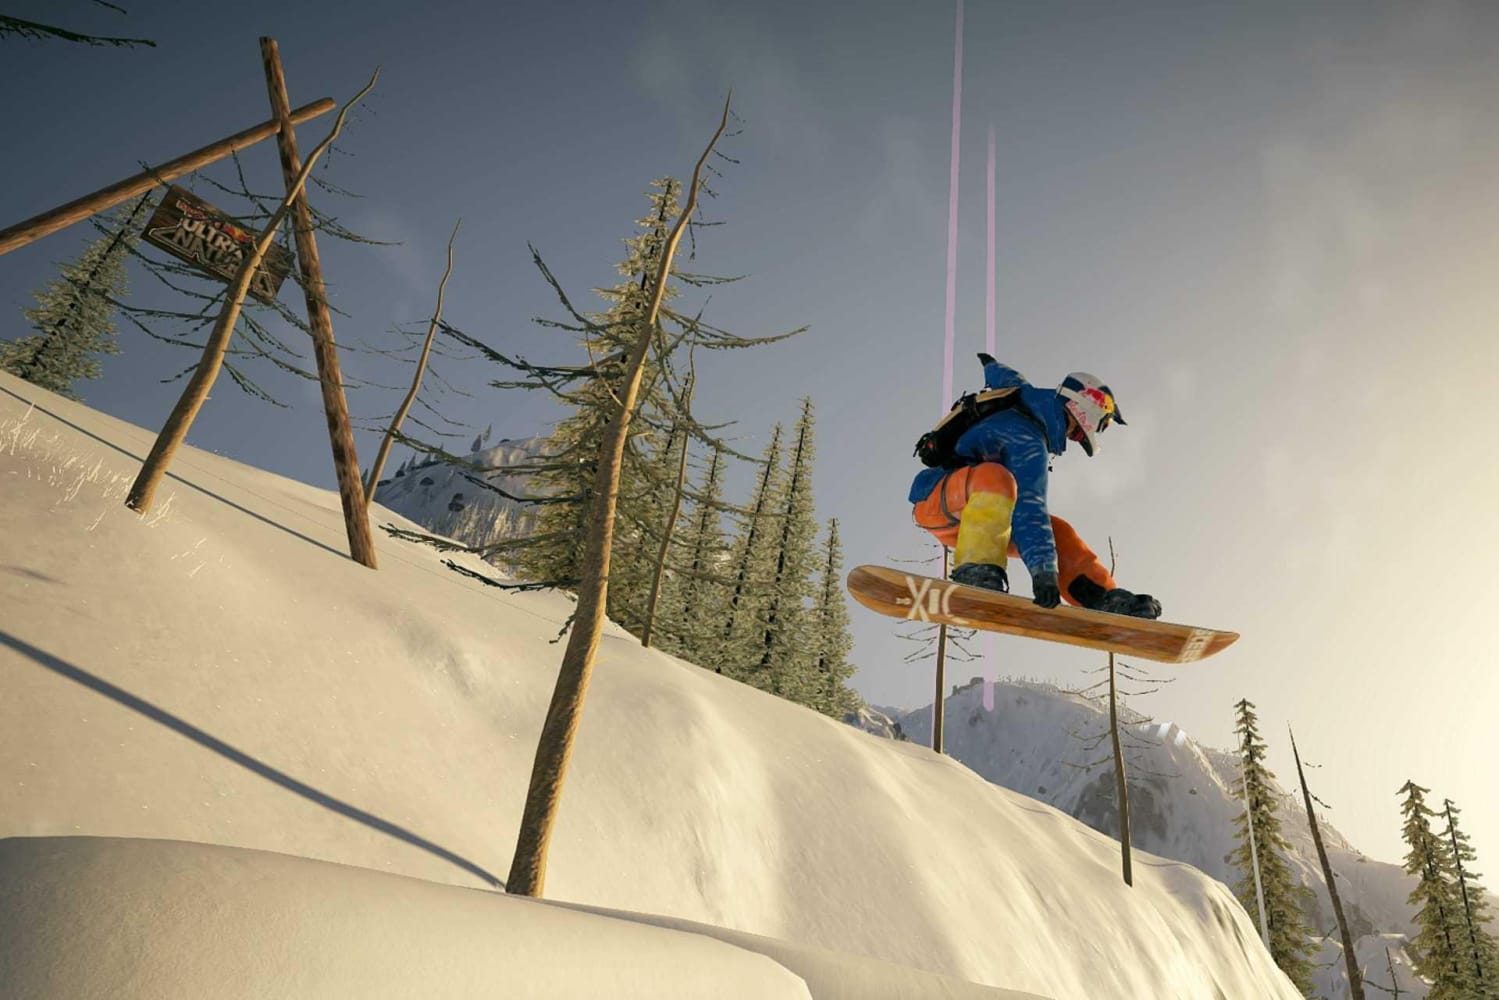 Top Tips for Those Just Getting Started with Steep – GameSpew